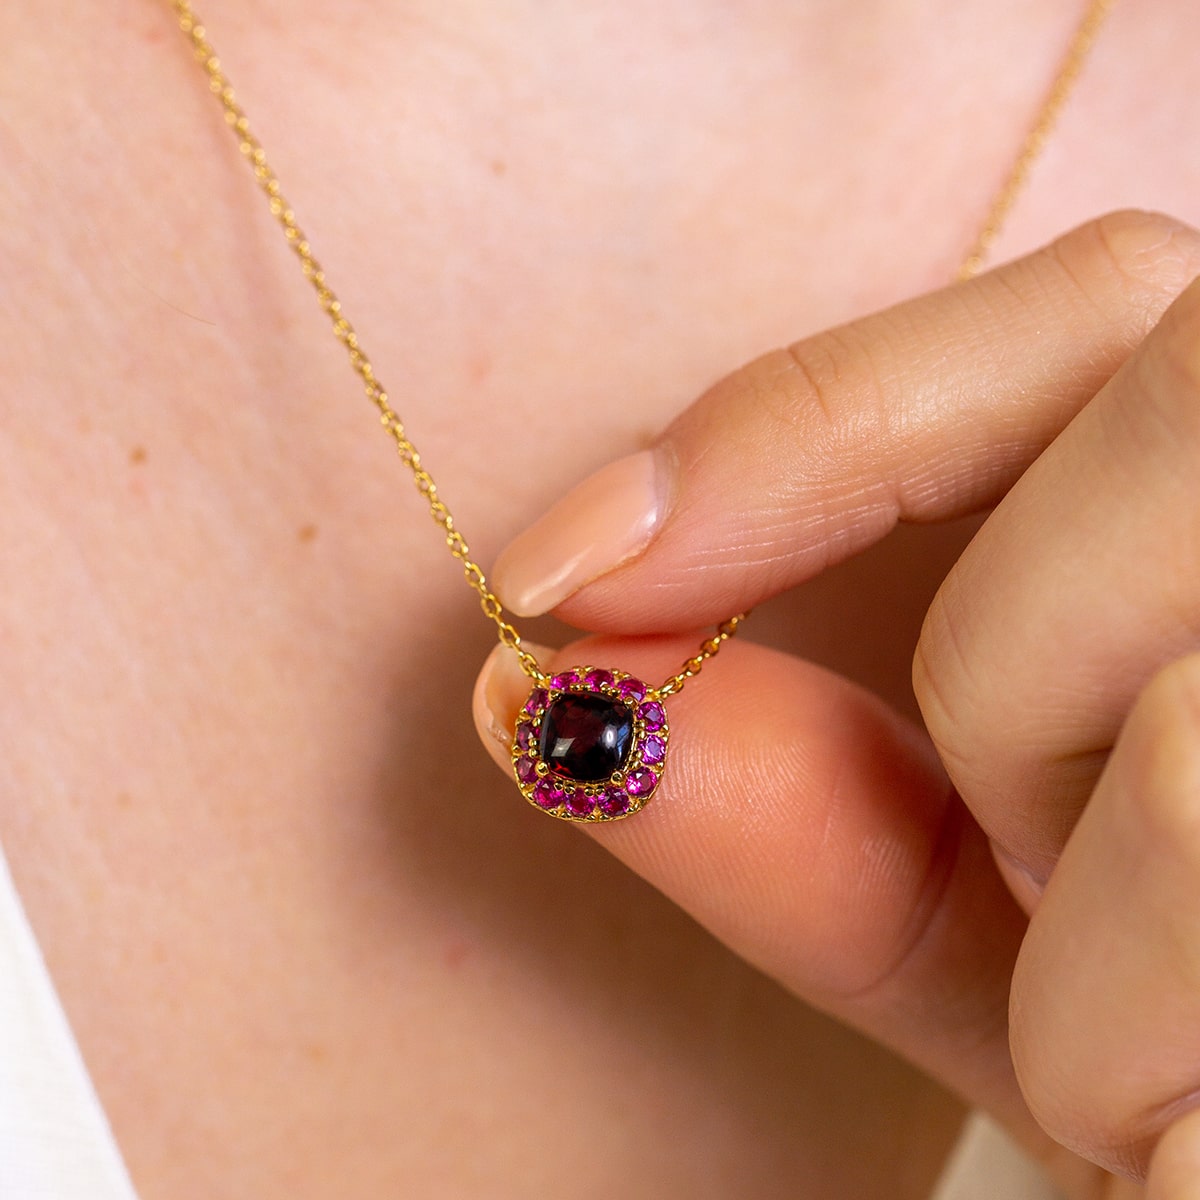 9ct Rose Gold and Garnet Pear Shaped Necklace - Aladdins Cave Jewellery